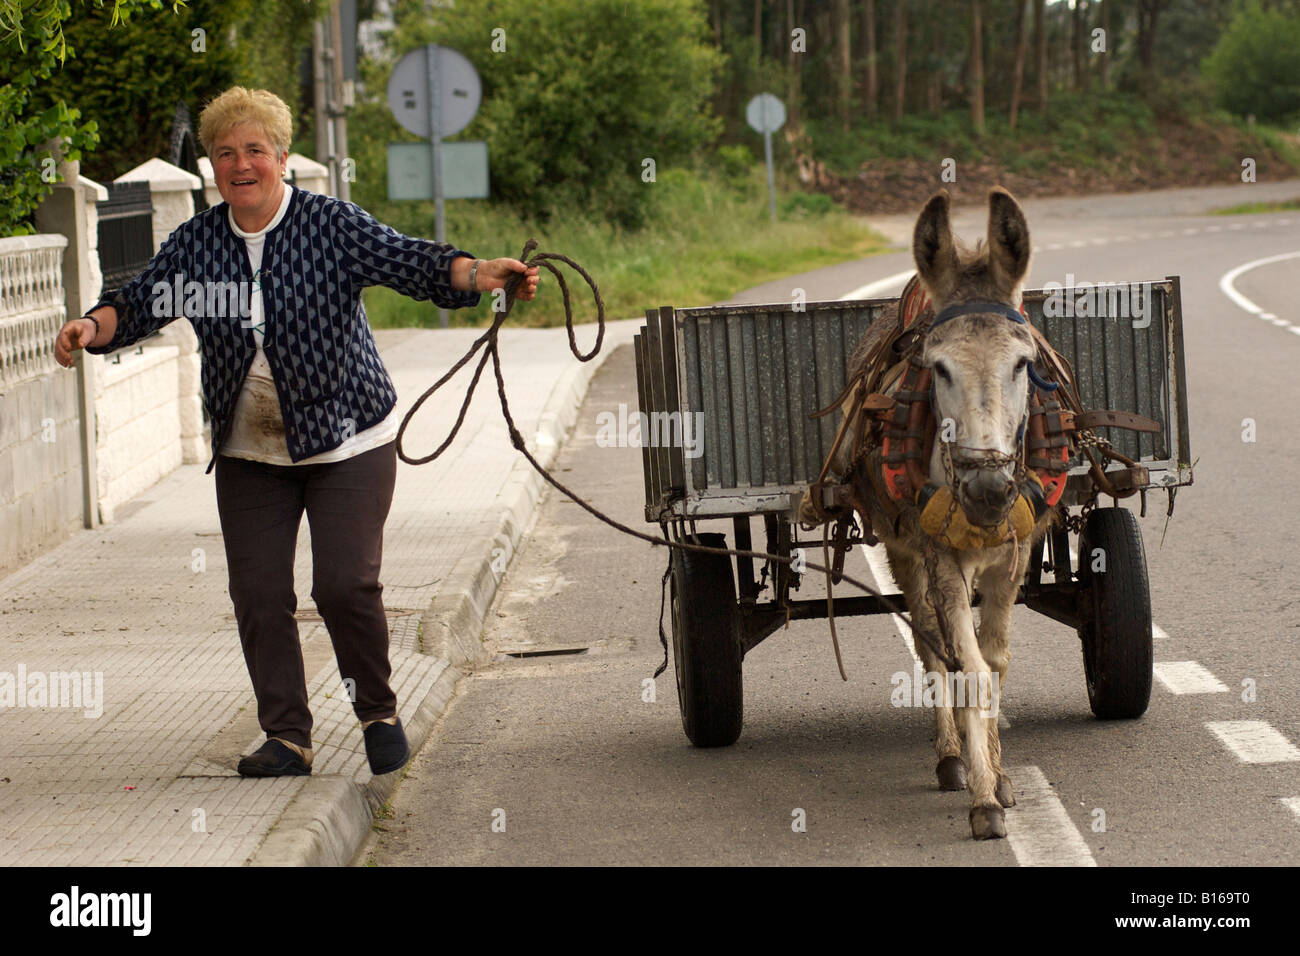 Spanish woman and her donkey cart in Spain's Galicia region. Stock Photo